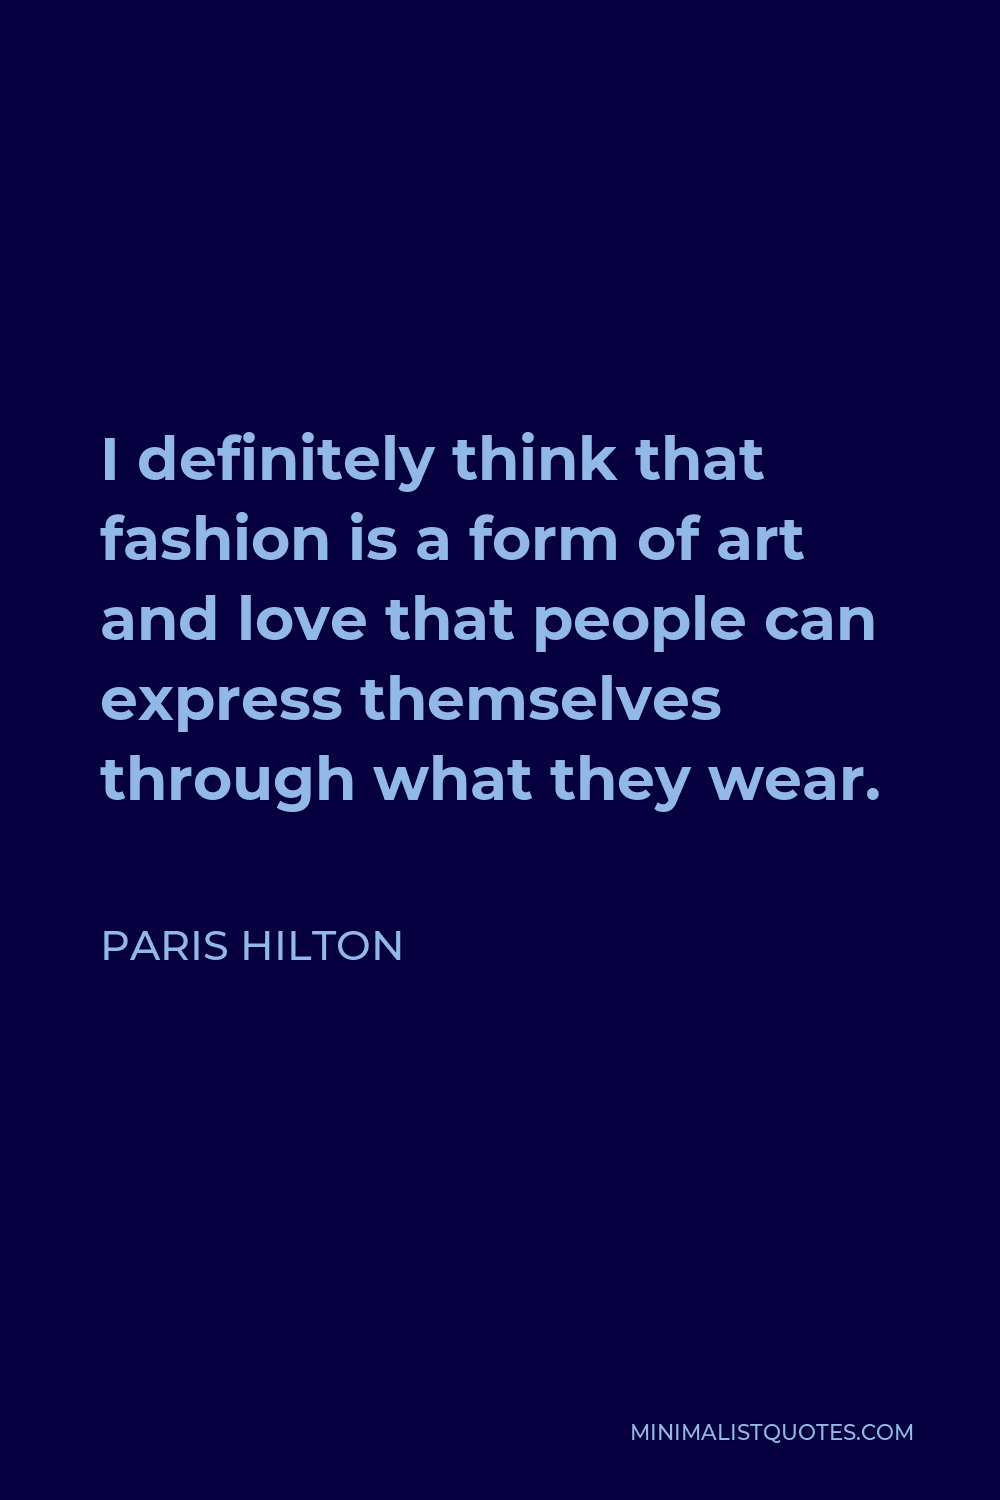 Paris Hilton Quote - I definitely think that fashion is a form of art and love that people can express themselves through what they wear.